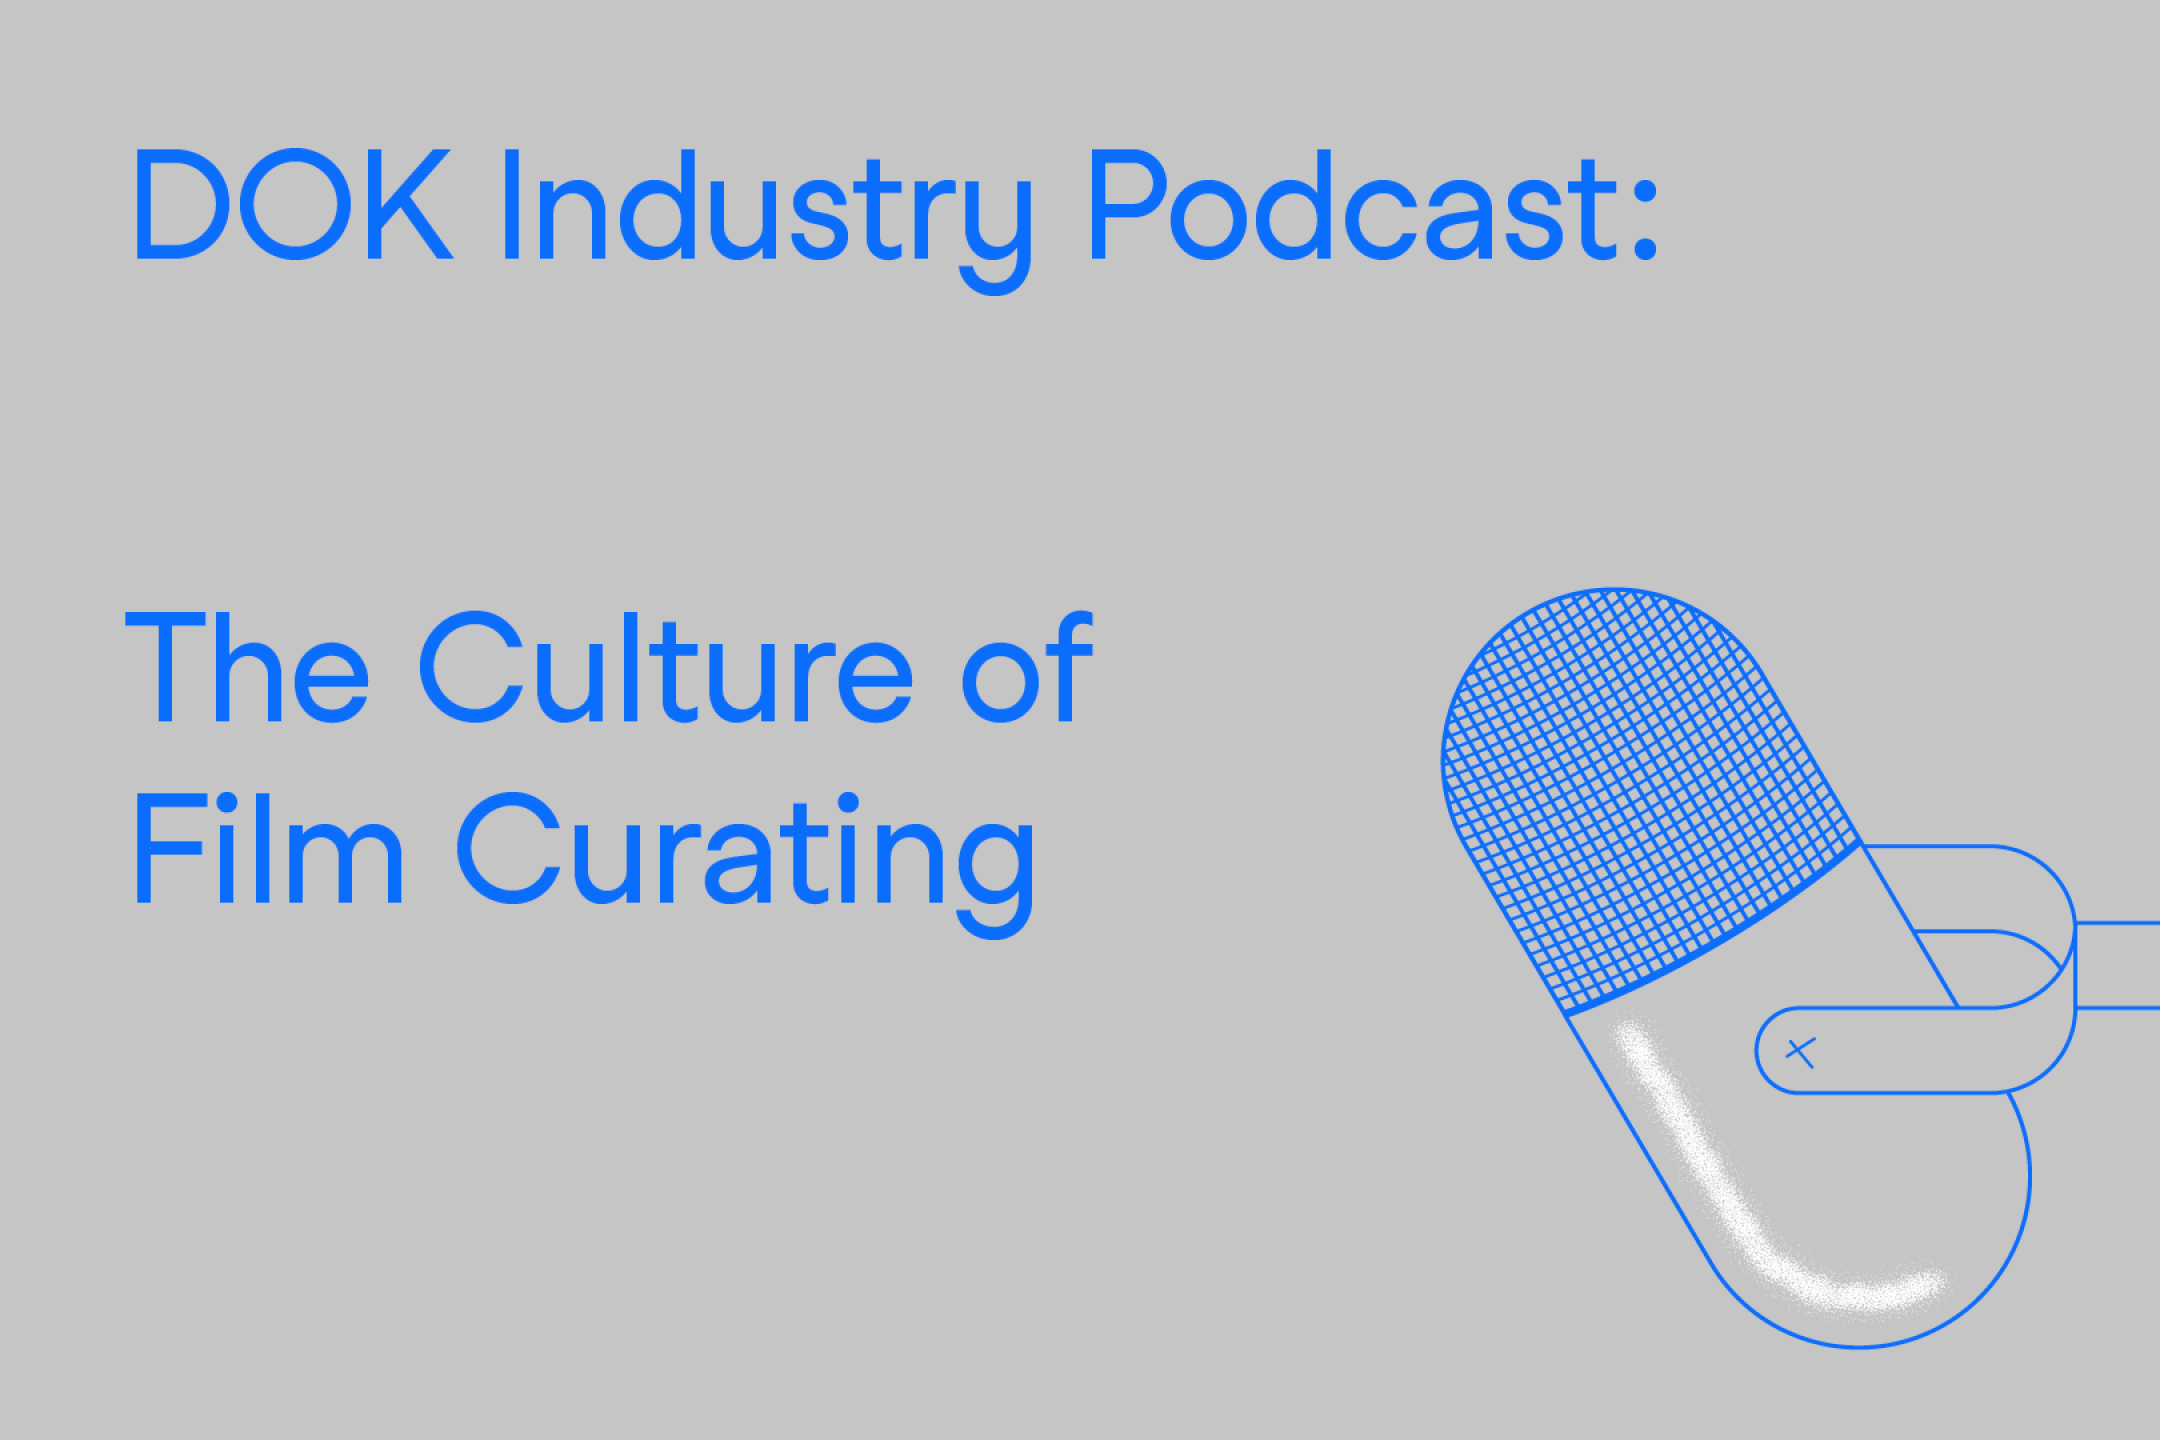 A text graphic: At the right a radio microphone in blue, at the left the text: "DOK Industry Podcast: The Culture of Film Curating"